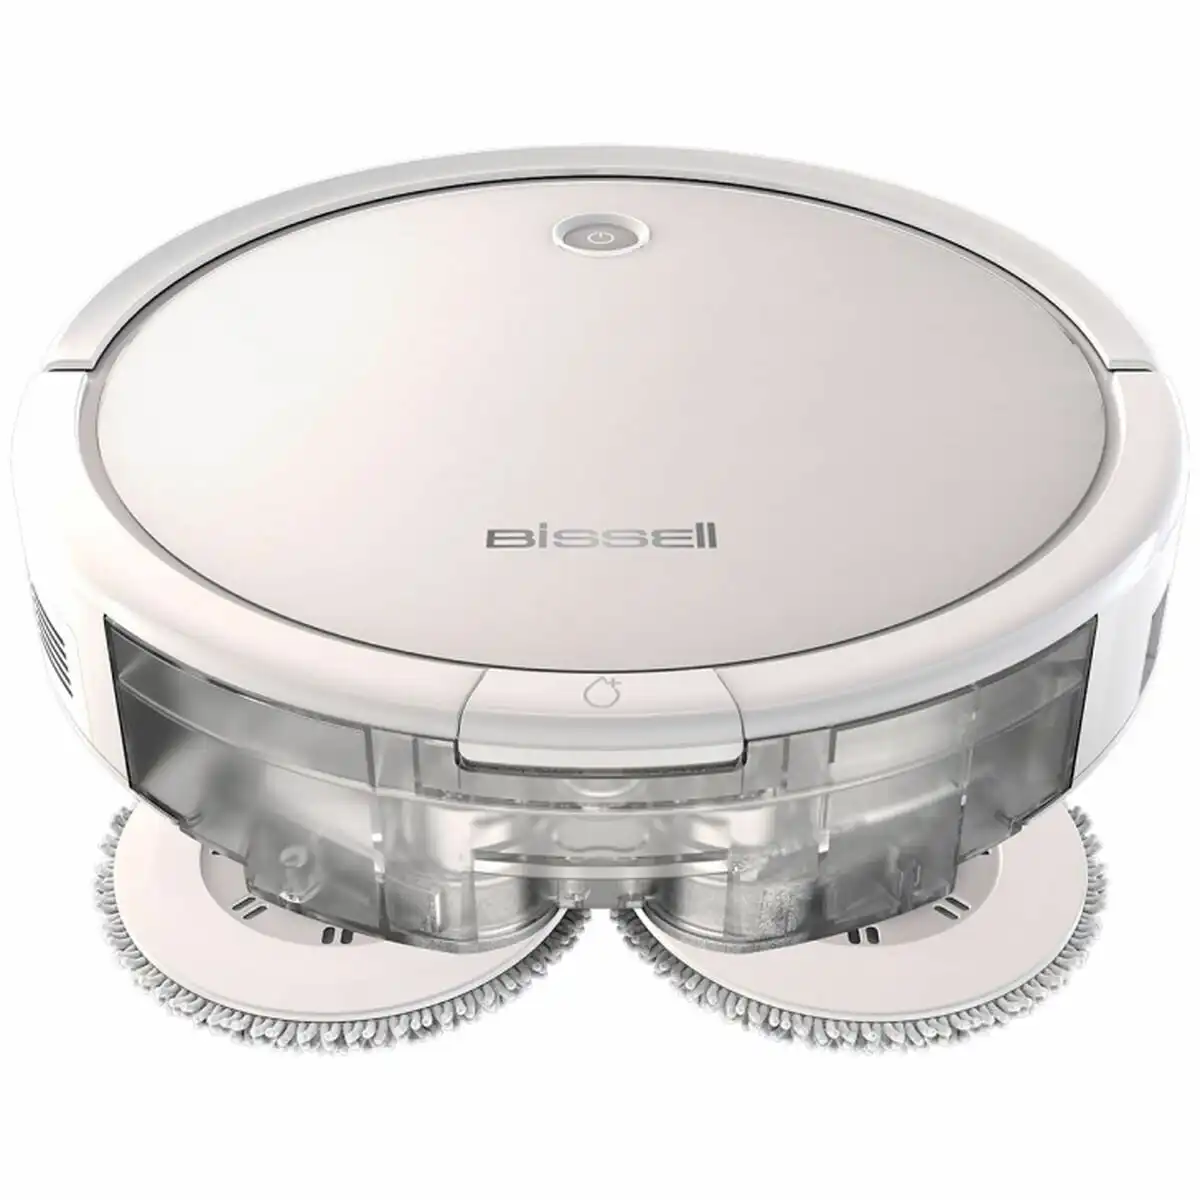 Bissell SpinWave Wet/Dry Robot Vacuum